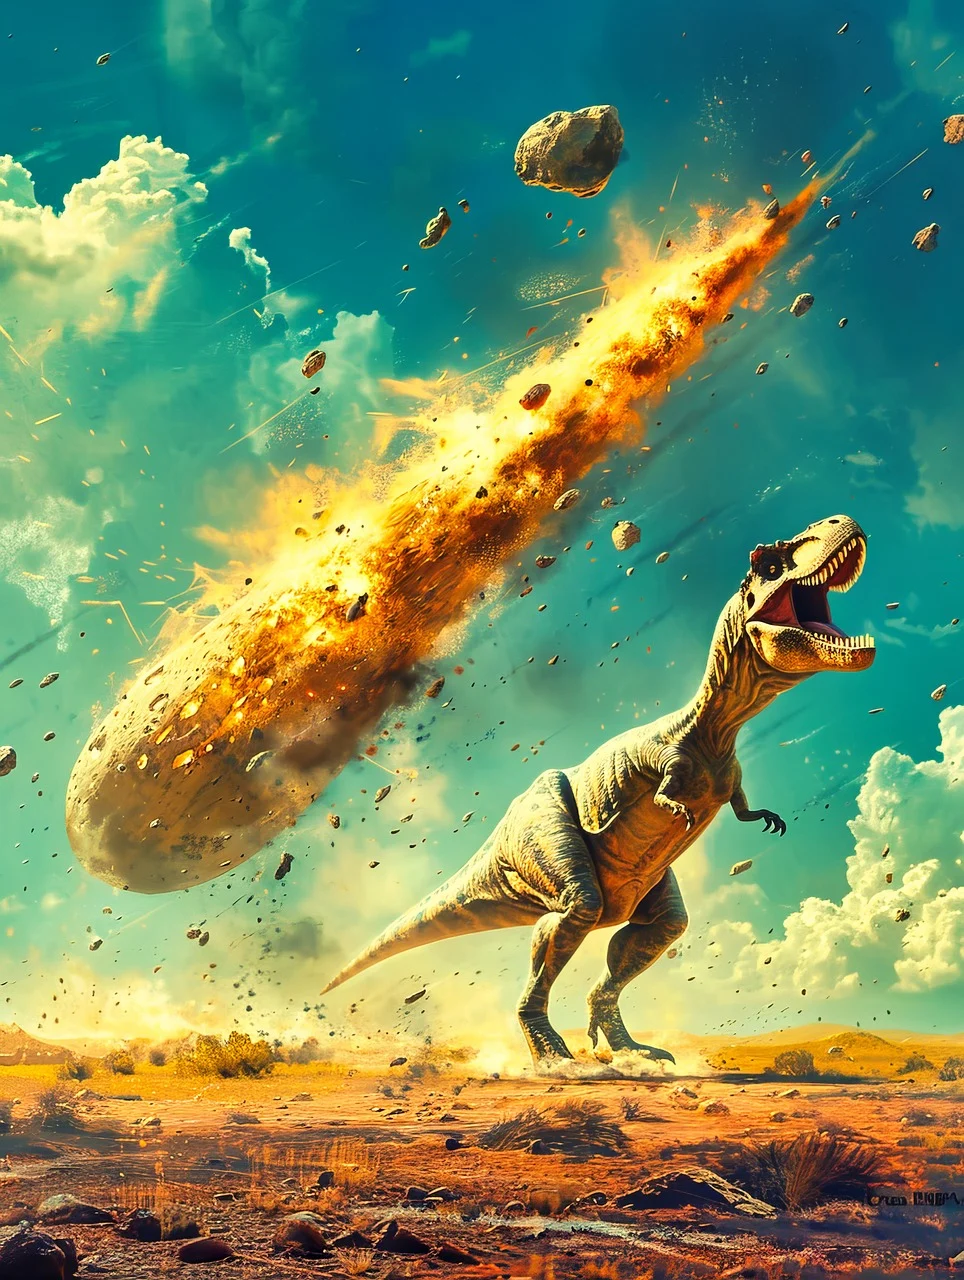 Dinosaurs and asteroids